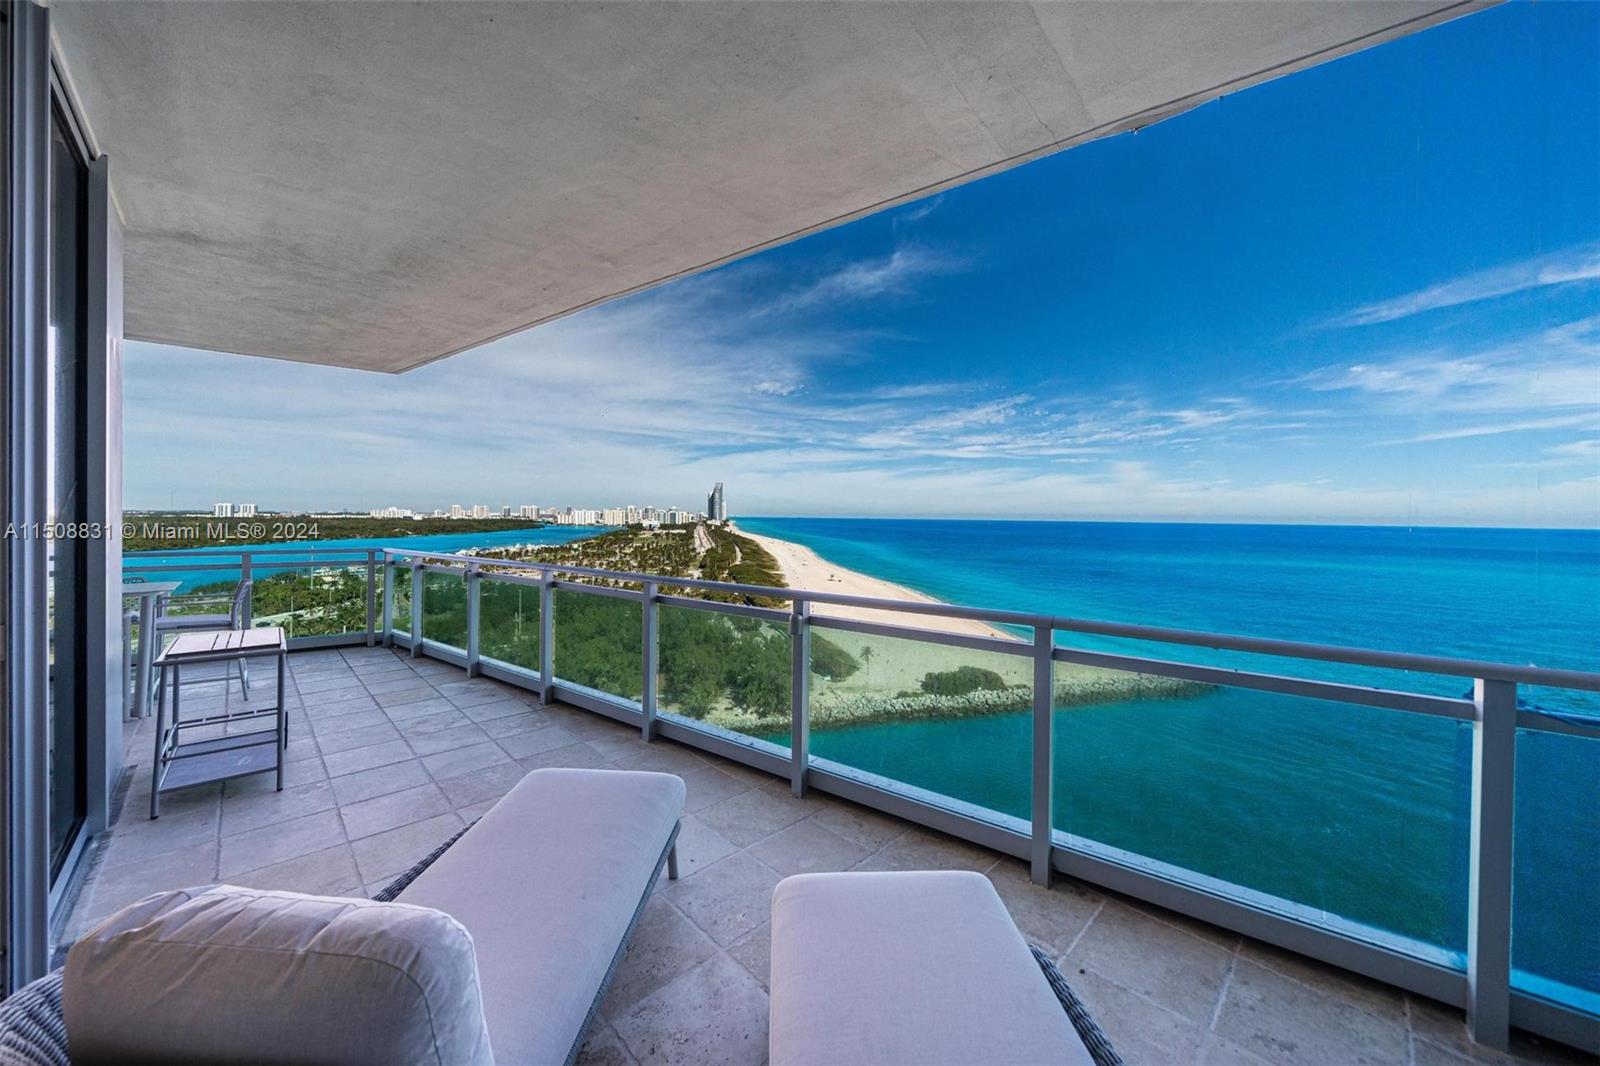 Best on the Beach, This  Luxury Residences awaits you at The Ritz Carlton in the highly sought-after Bal Harbour neighborhood. This stunning 3-bedroom, 3.5-bathroom residence has endless panoramic ocean & city views that take your breath away. This home has designer details in every sq. Inch, tastefully designed  spaces, the top finishes & top-of-the-line appliances; open-concept living & dining  are perfect for entertaining guests. Enjoy world-class amenities, i24-hour concierge service, a private beach club, a state-of-the-art fitness center, a full-service spa, a heated oceanfront pool, 2 onsite restaurants and bar, you have everything you need for a life of luxury. This extraordinary residence is the ultimate destination for those seeking the finest in South Florida living.